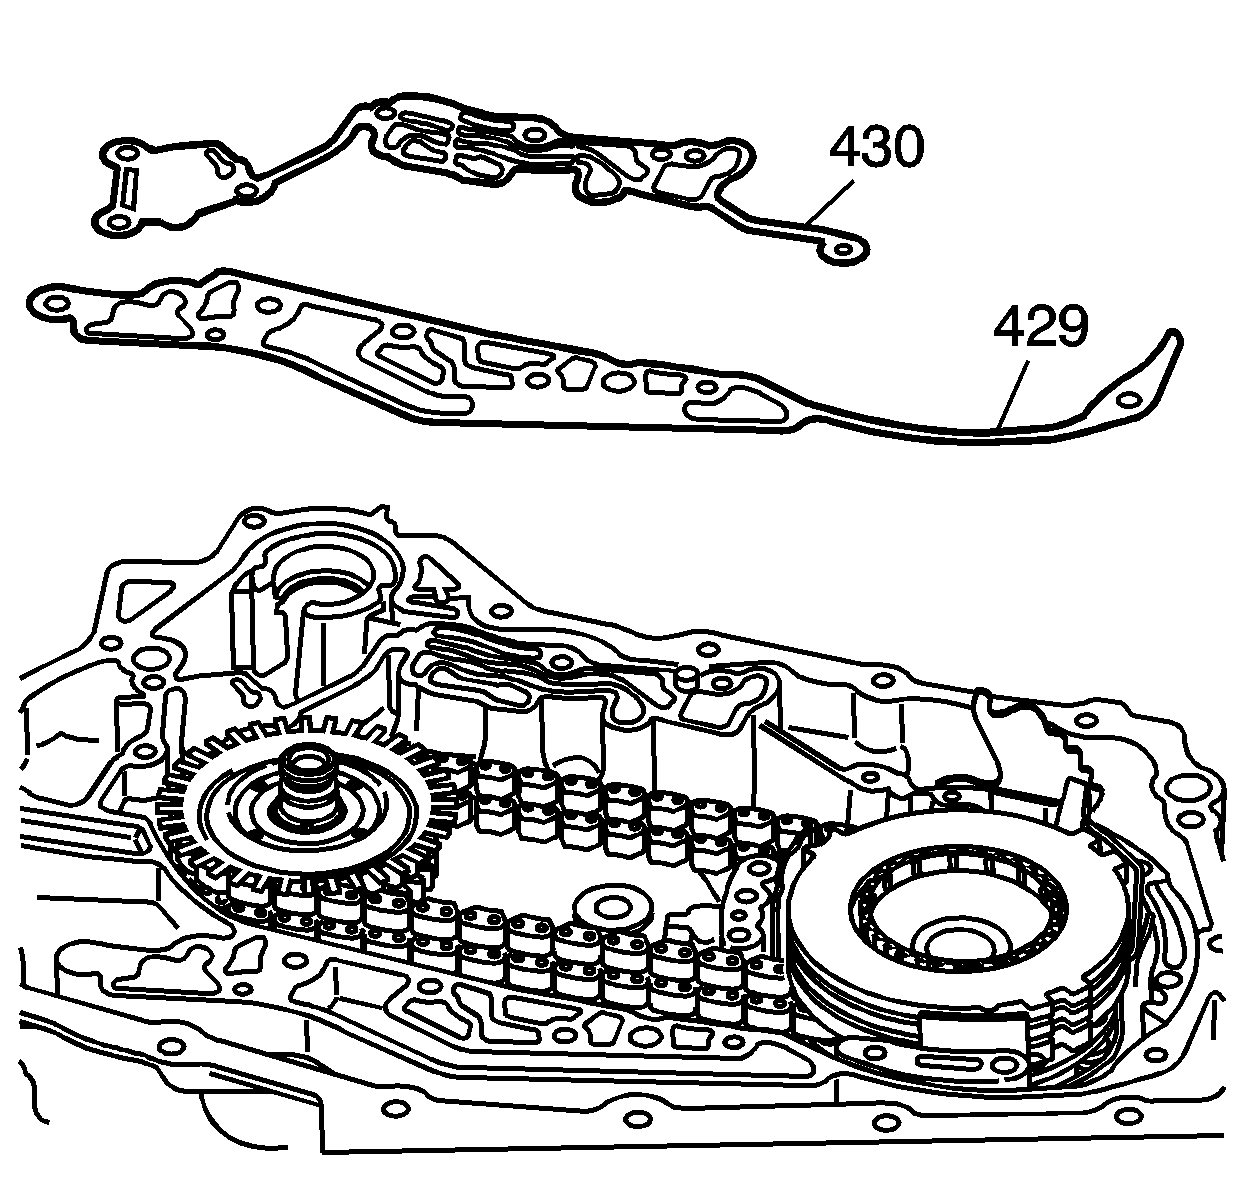 01-07-30-032E: Transmission Oil Leaking From Transmission Vent (Replace Transmission Case Cover (Channel Plate) Gasket)